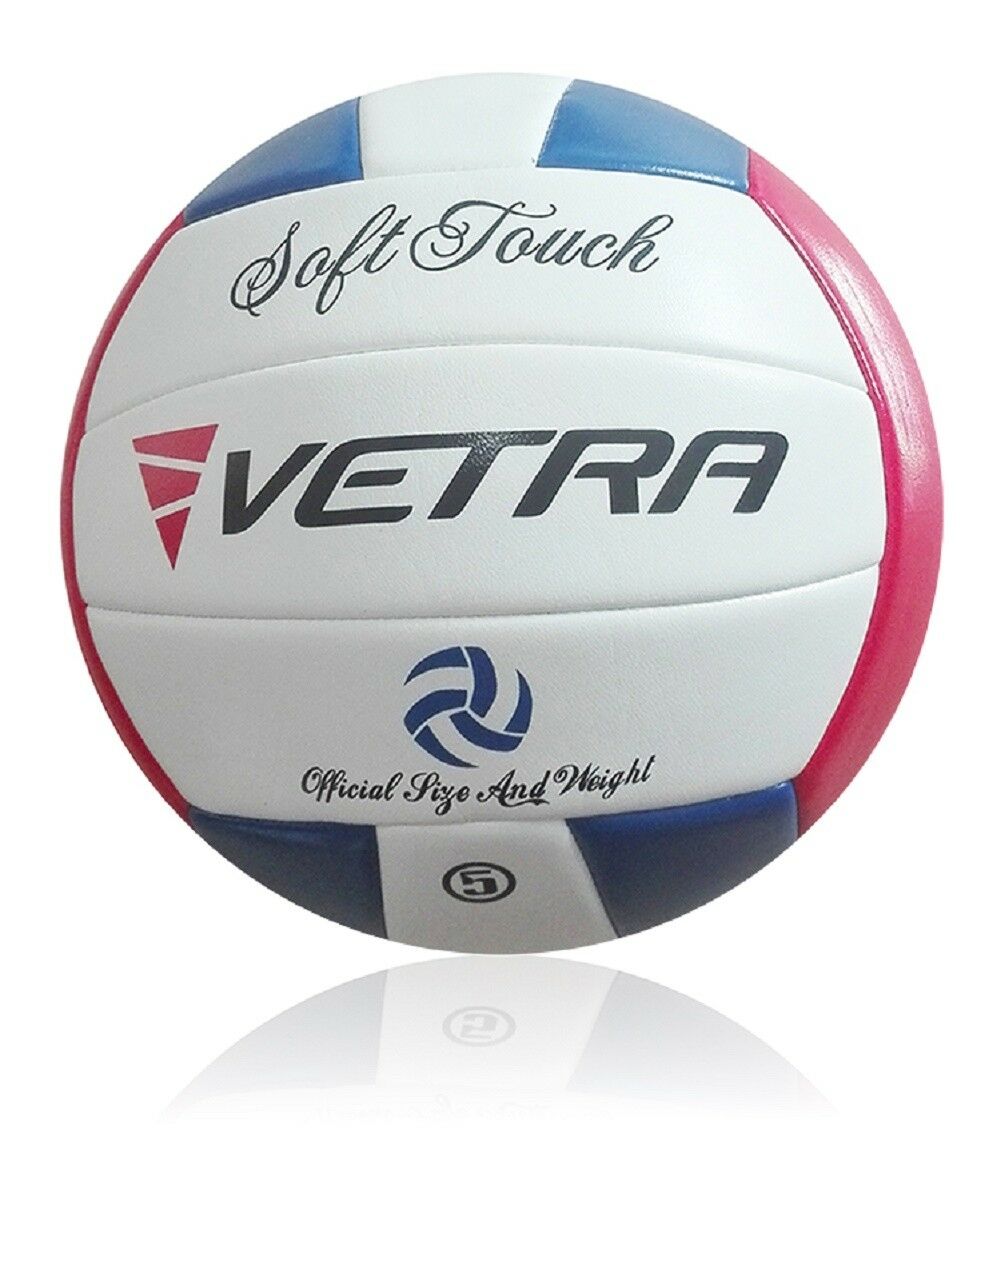 Vetra Volleyball Soft Touch Ball Official Red/blue/white Outdoor Indoor Game